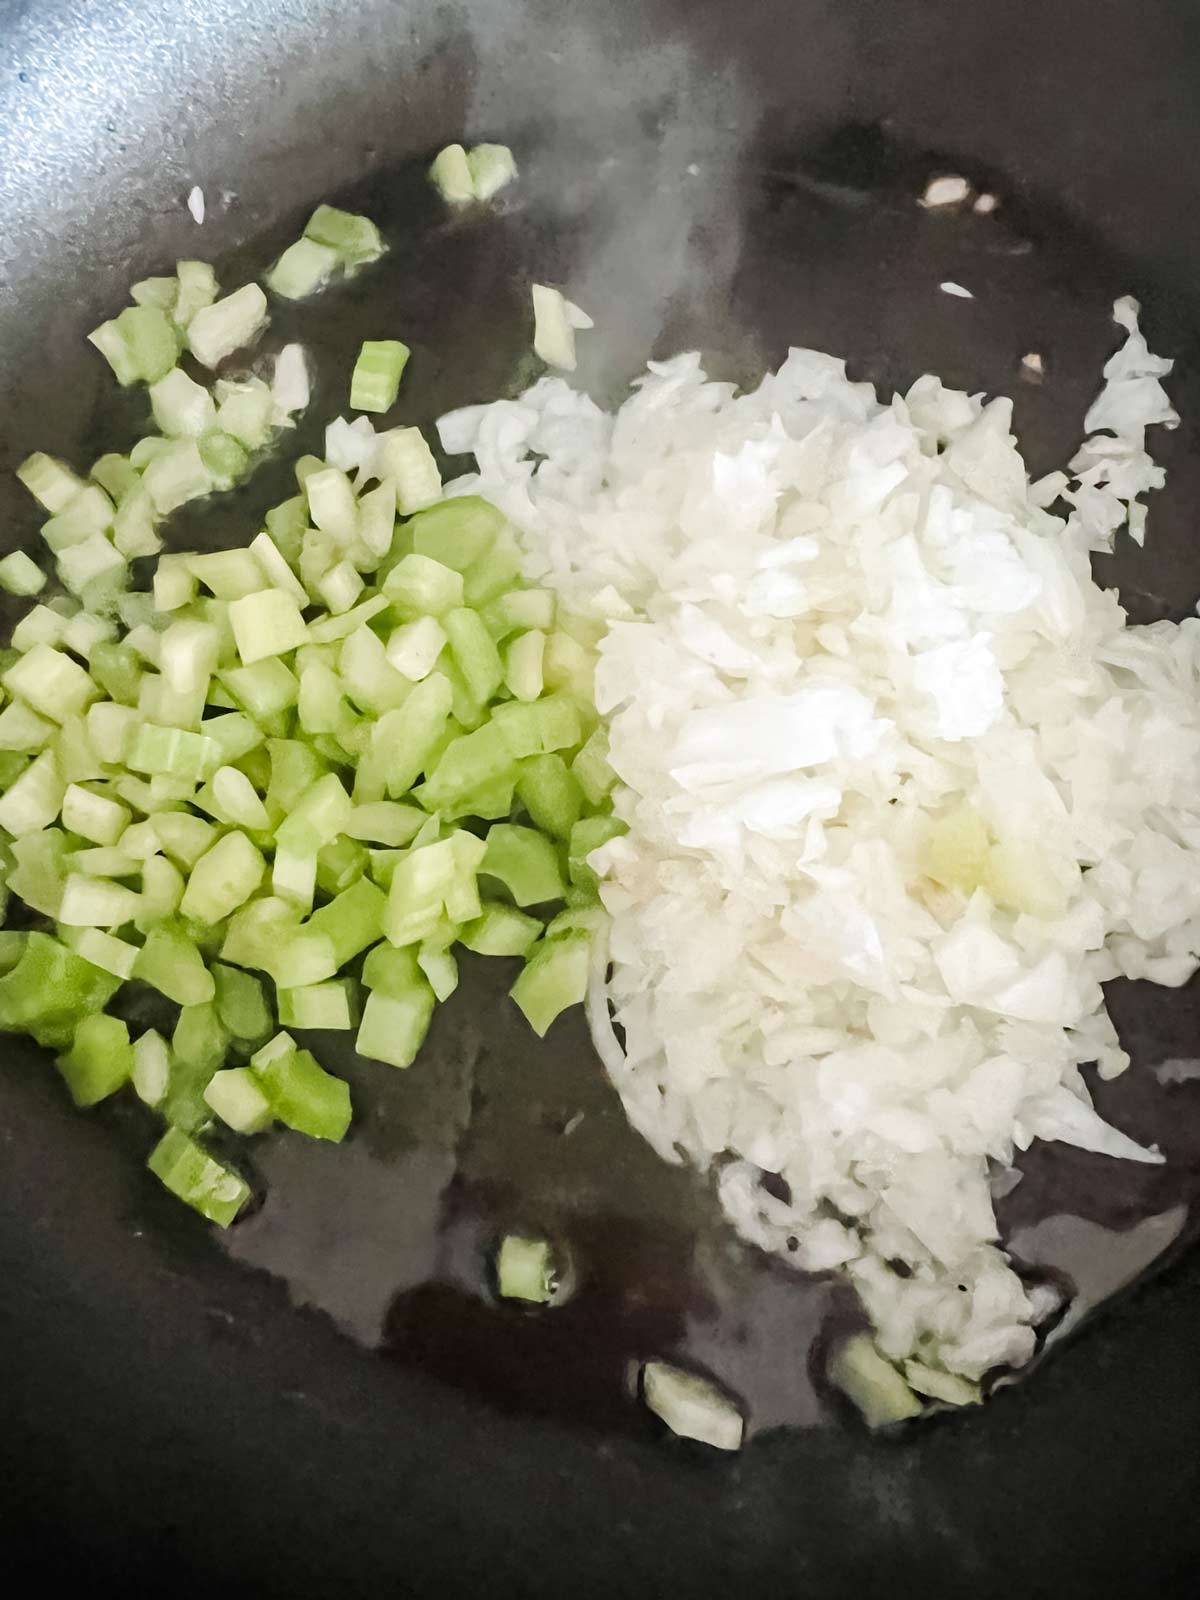 Onion and celery cooking in oil in a skillet.